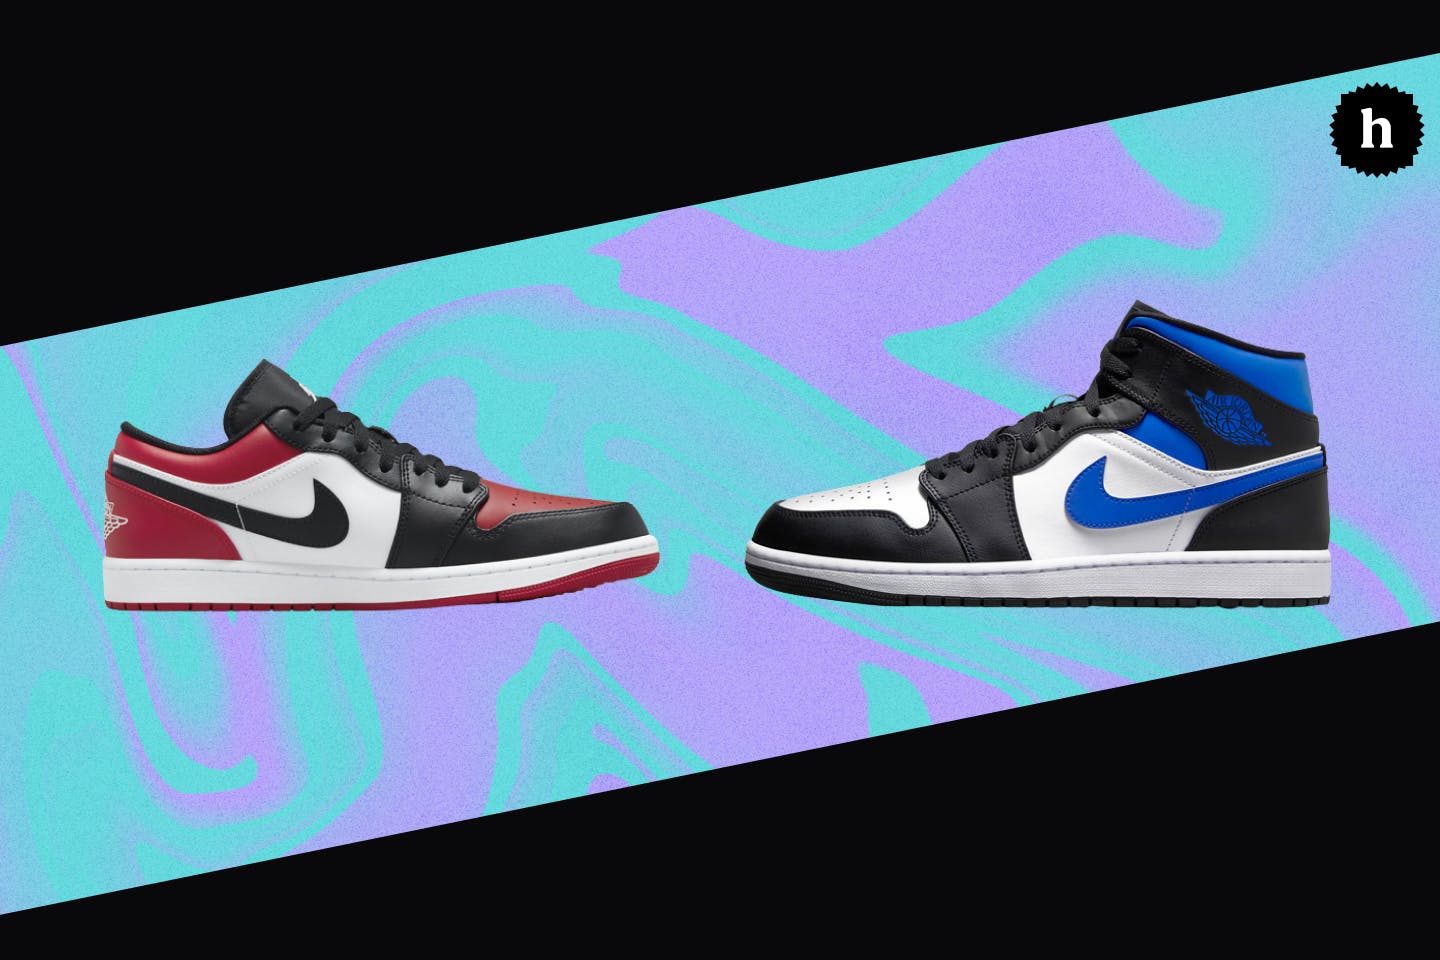 https://images.prismic.io/hybe/26bdbbb4-c09a-4480-a77d-a0ee78e2e15b_jordan-sneakers-under-200-dollars-banner.png?auto=compress,format